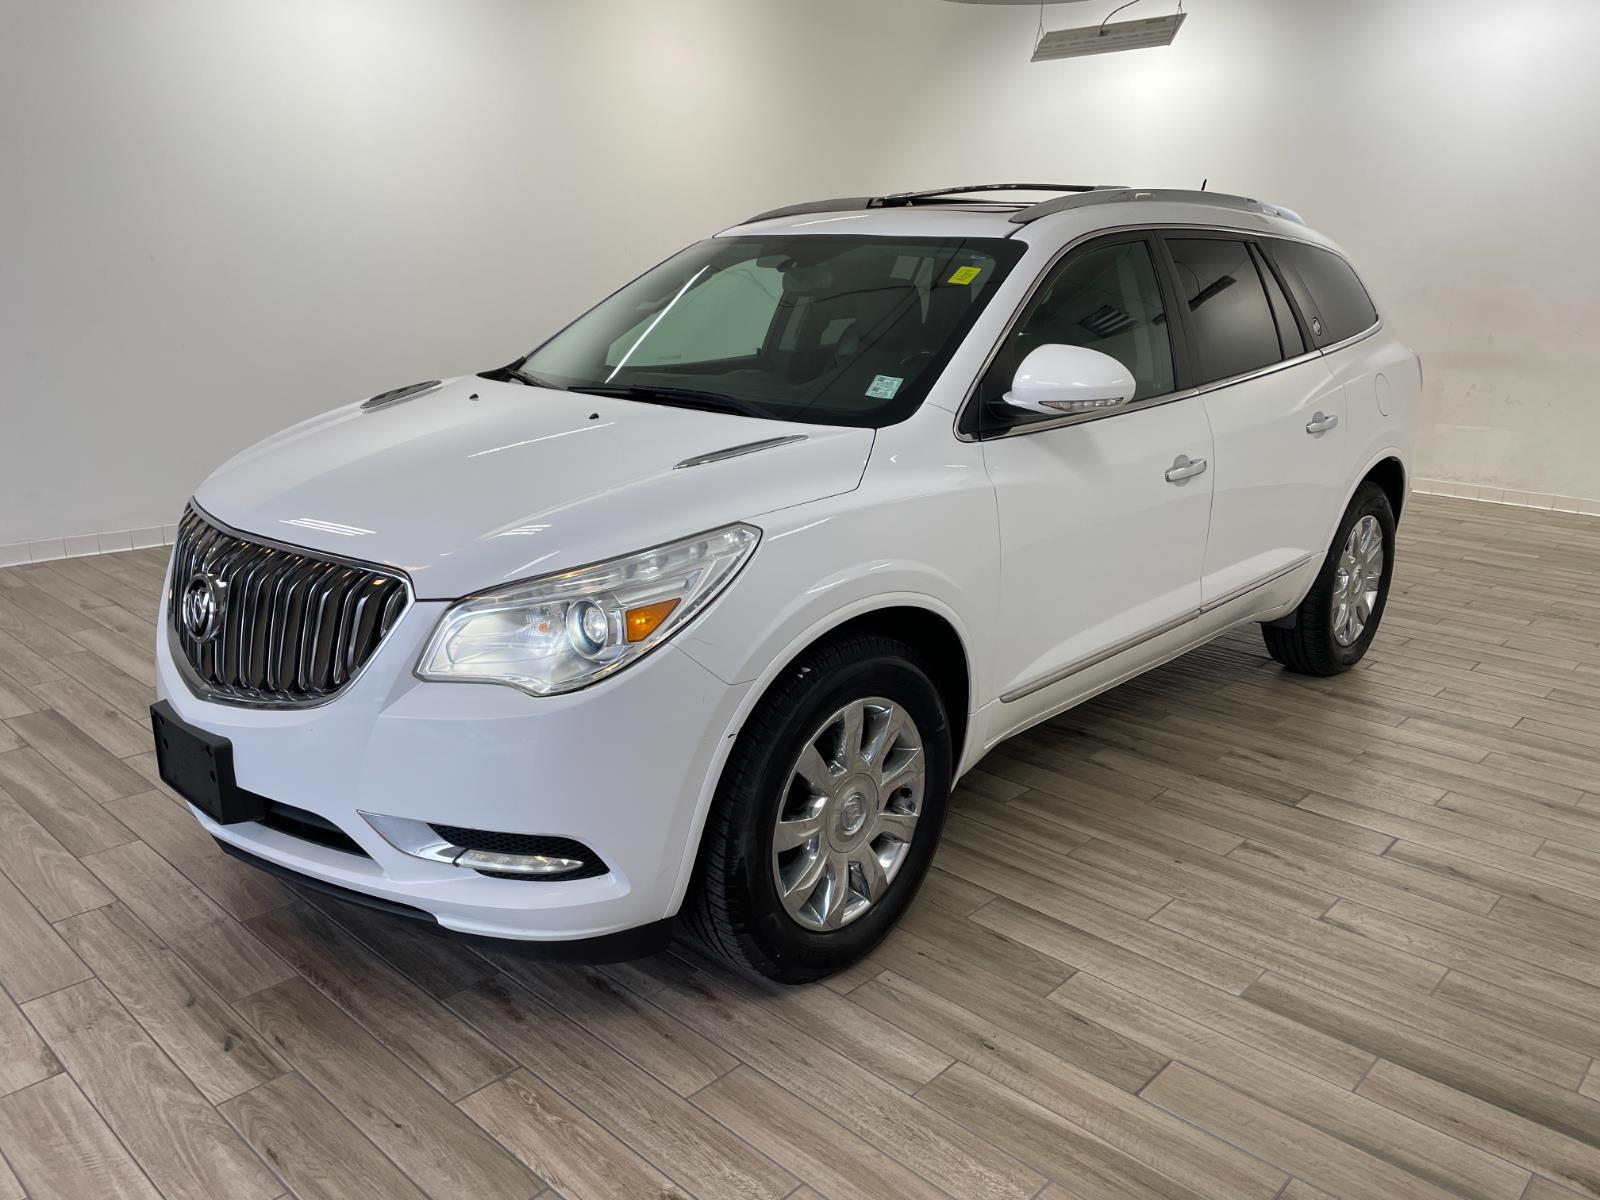 Pre-Owned 2017 Buick Enclave AWD 4DR LEATHER Sport Utility Vehicle in  Florissant #G15251 | Travers GMT Auto North